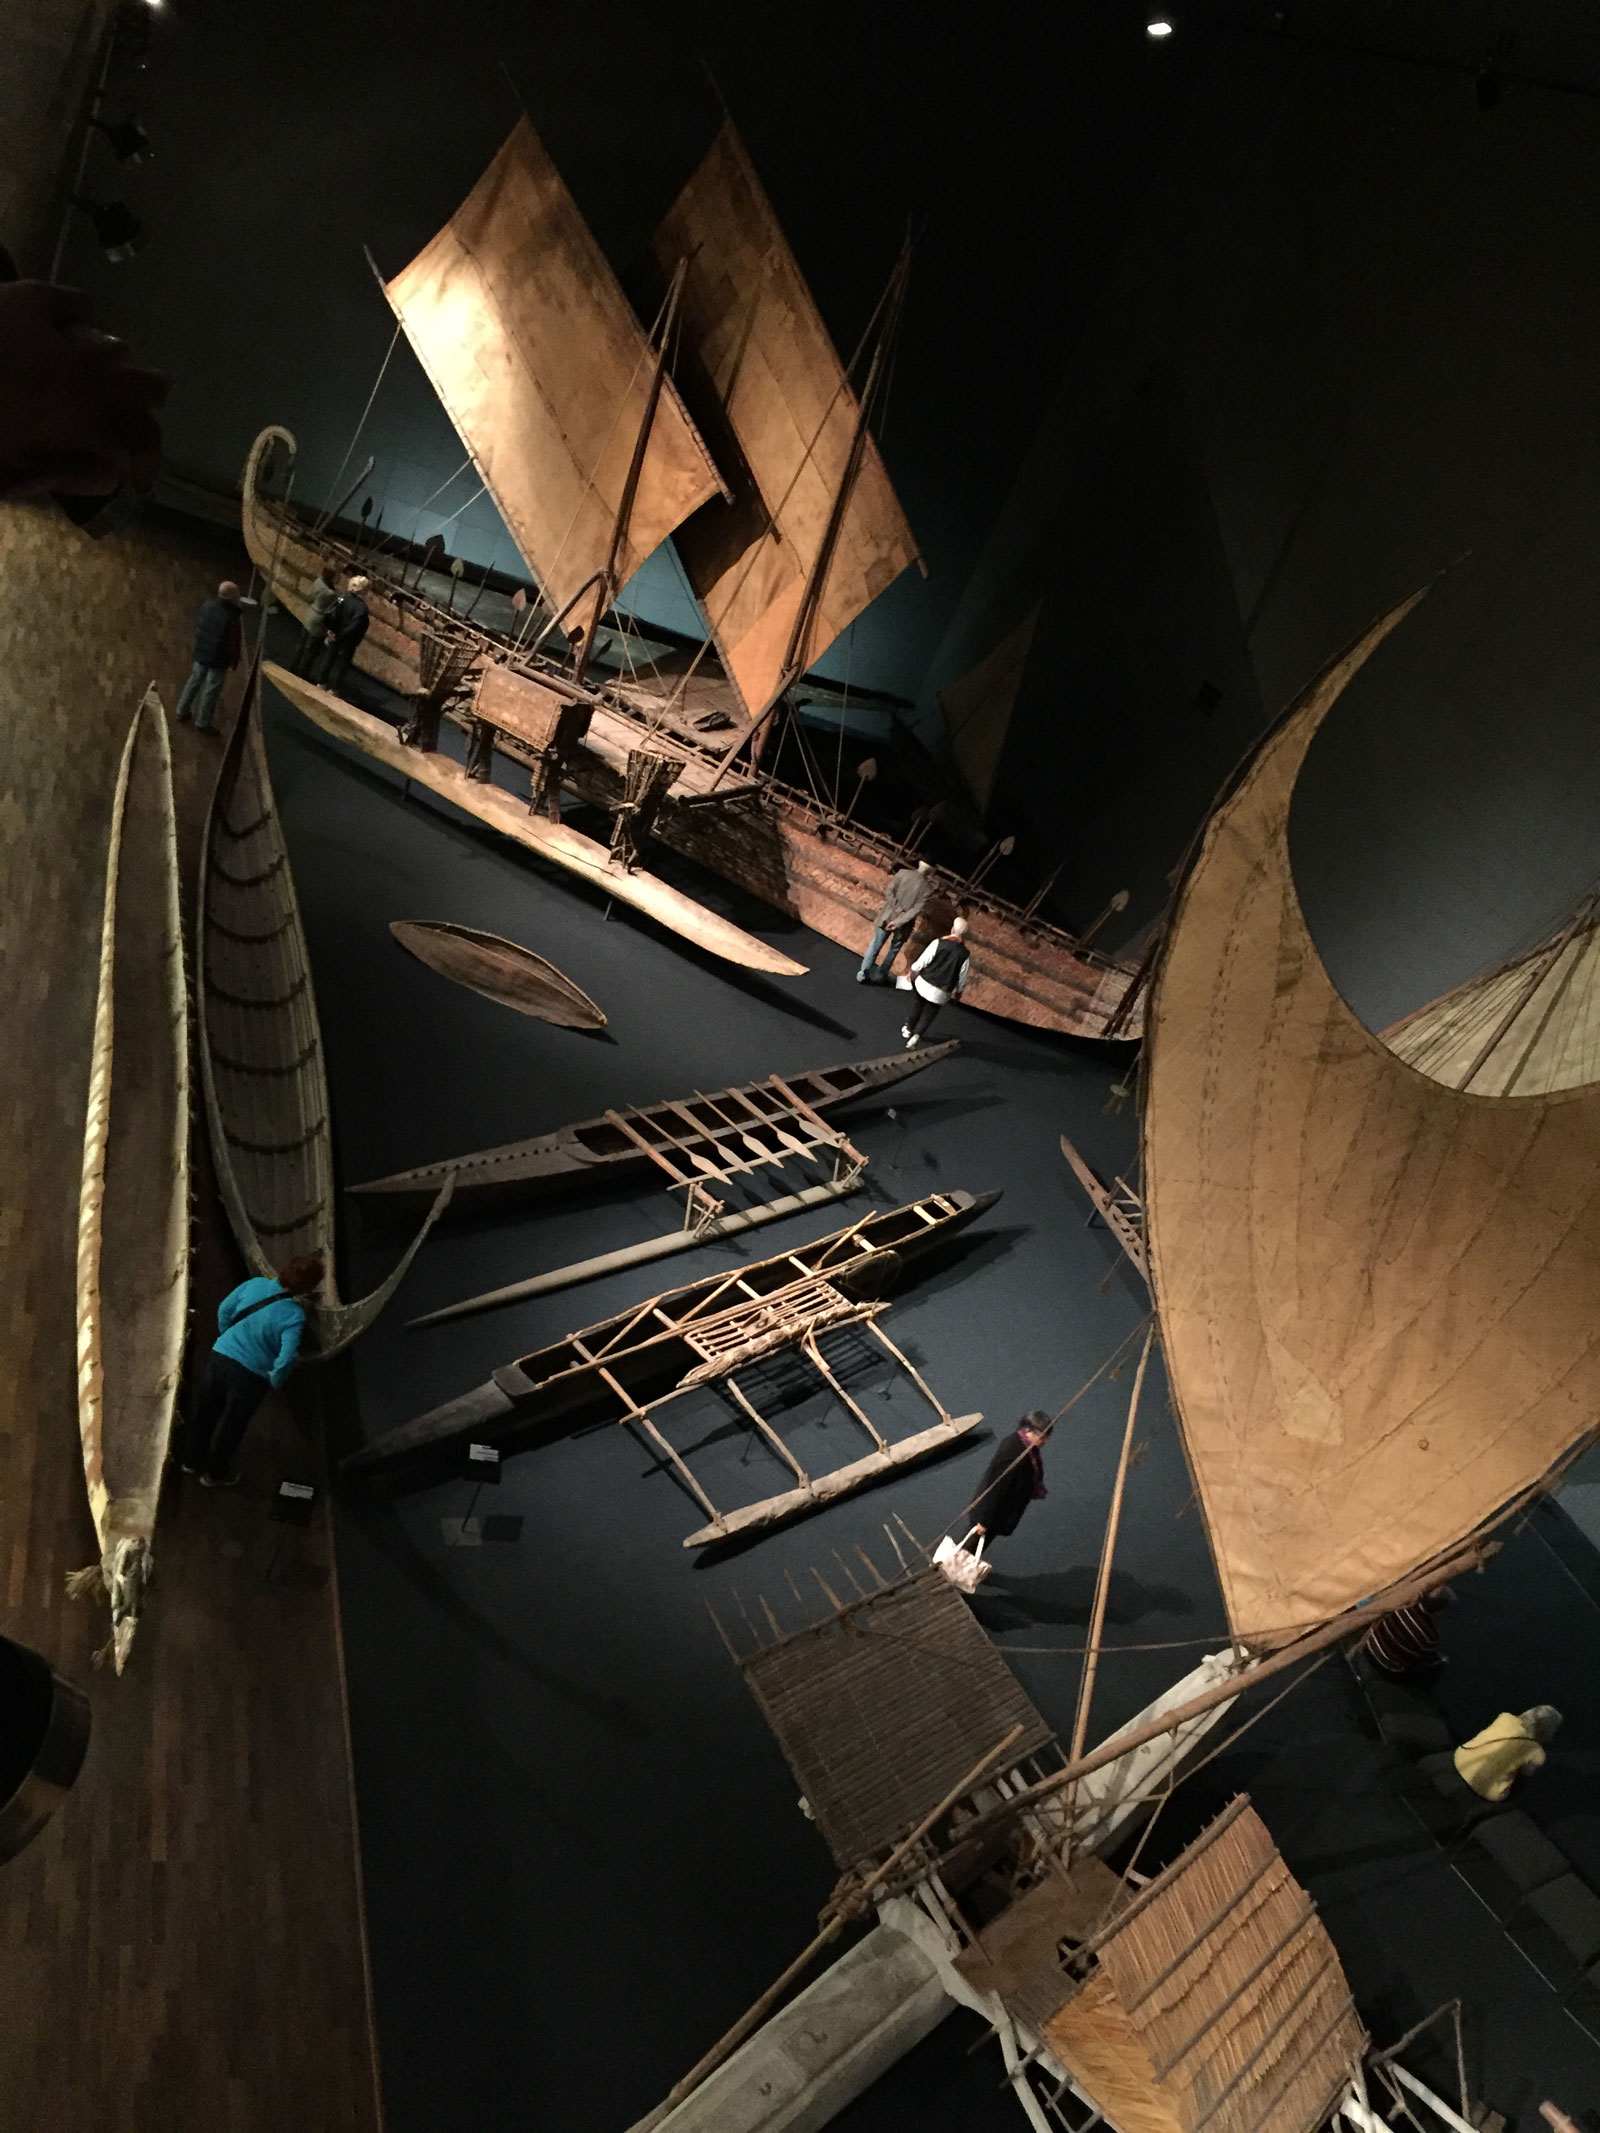 Outriggers at the Dahlem Museum, Berlin, 2016